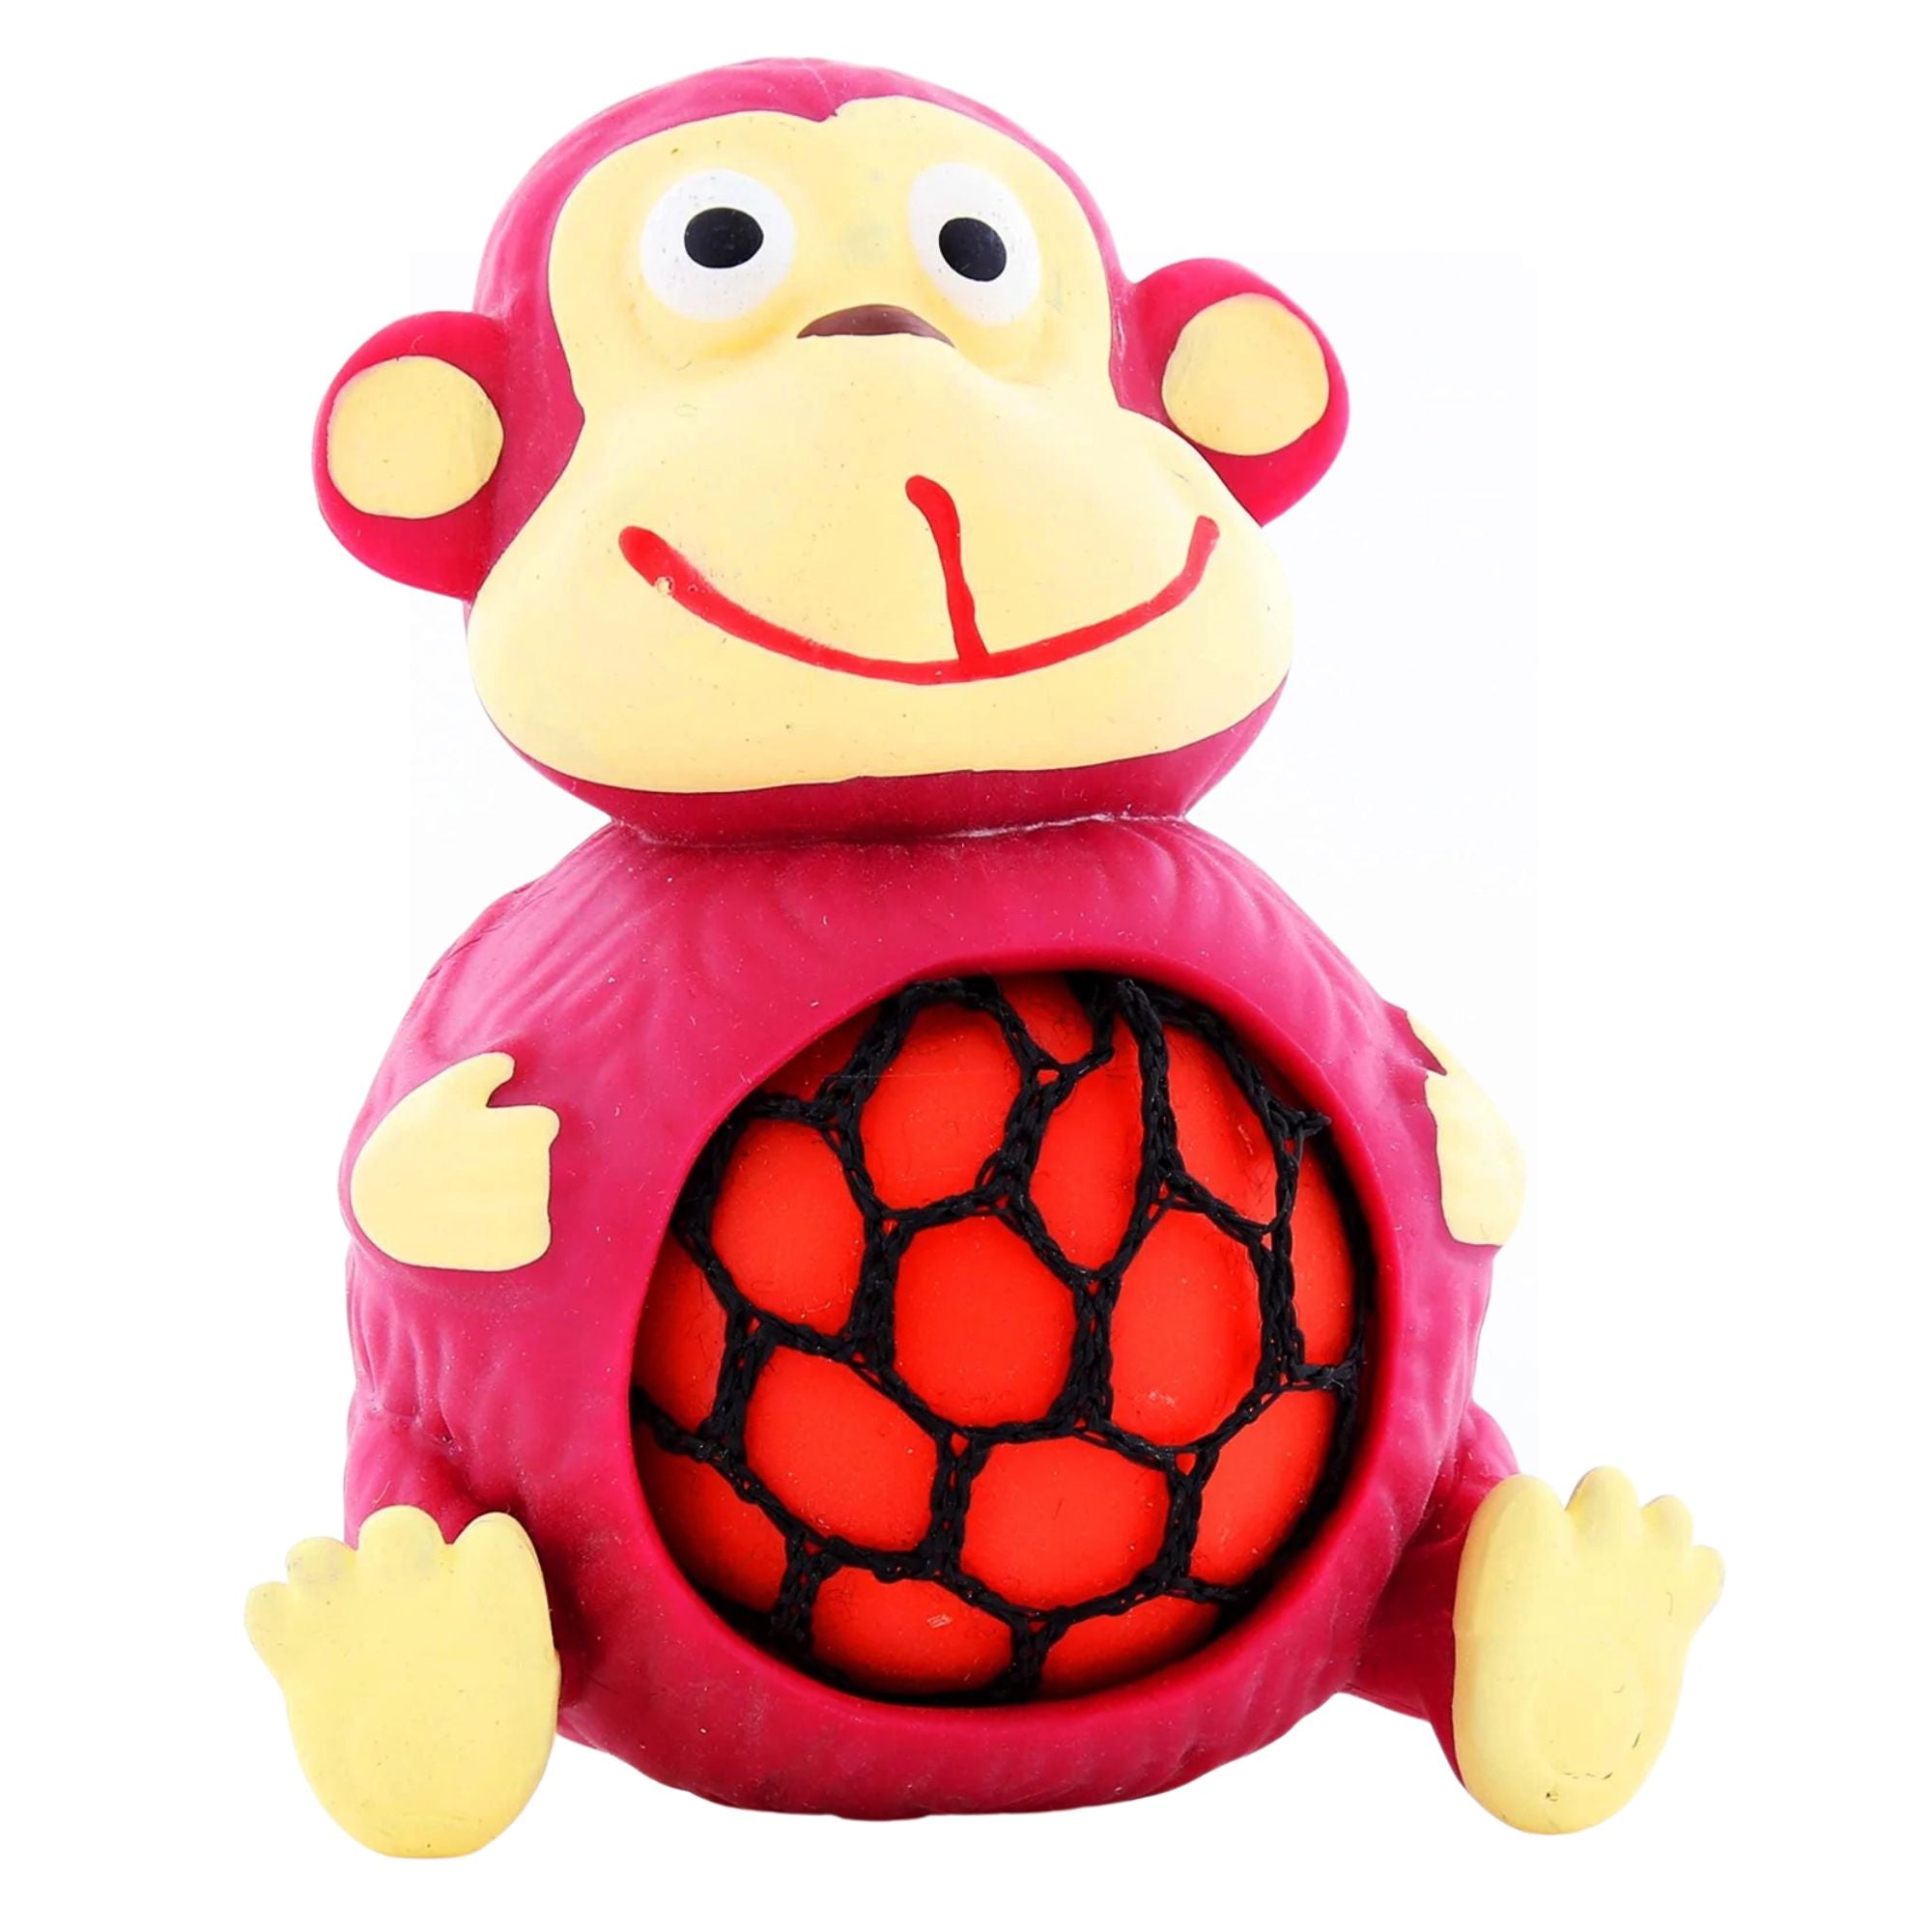 Squeezy Meshables Monkey, The Squeezy Meshables Monkey is a great fun squeezy tactile fidget toy - a squishy mesh ball inside a funky squeezy Monkey. The Squeezy Meshables Monkey is a fantastic squeezy stress toy which also demonstrates cause and effect. Squeeze away and watch the squish mesh ball protrude out of the Monkey's tummy! Assorted colourful monkey's Mesh ball protrudes when squeezed Returns to original form when released Approximately 9cm in length Suitable for ages 3 years+, Squeezy Meshables Mo